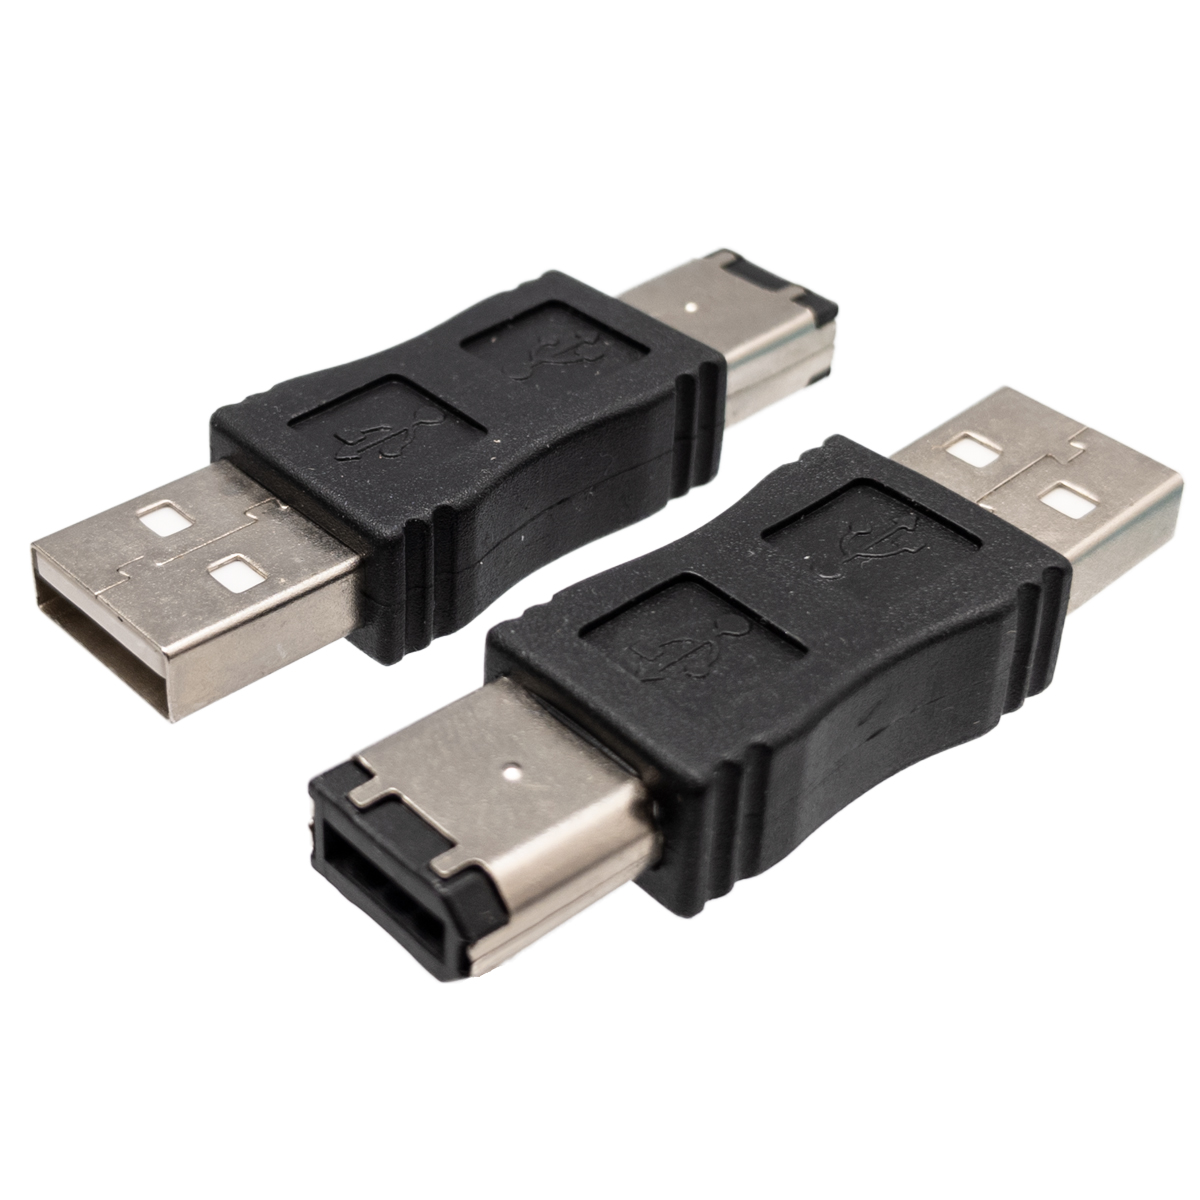 USB A MALE TO IEEE 1394 6P. MALE